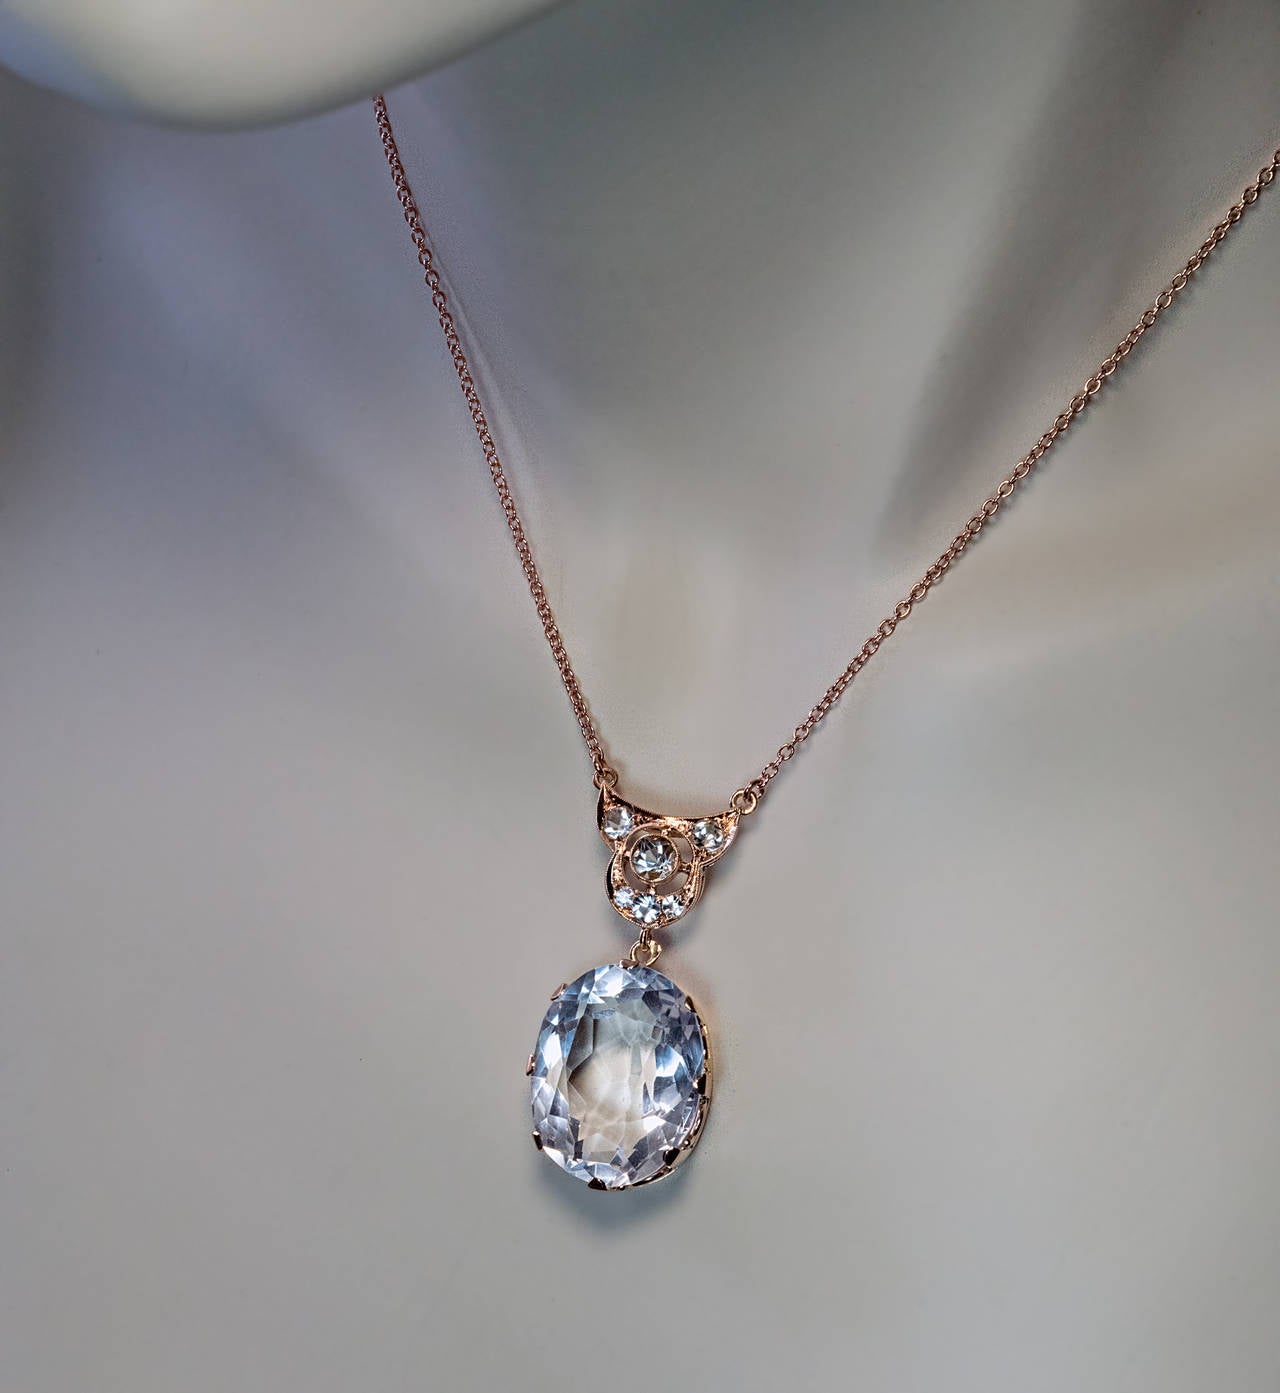 Russian, Moscow, circa 1930

The 14K rose gold necklace features a large (22.5 x 17.8 x 20.5 mm, approximately 43.51 ct) bluish white oval faceted rock crystal accented by six round ice blue spinels.

Marked with maker's initials 'P.C' and early